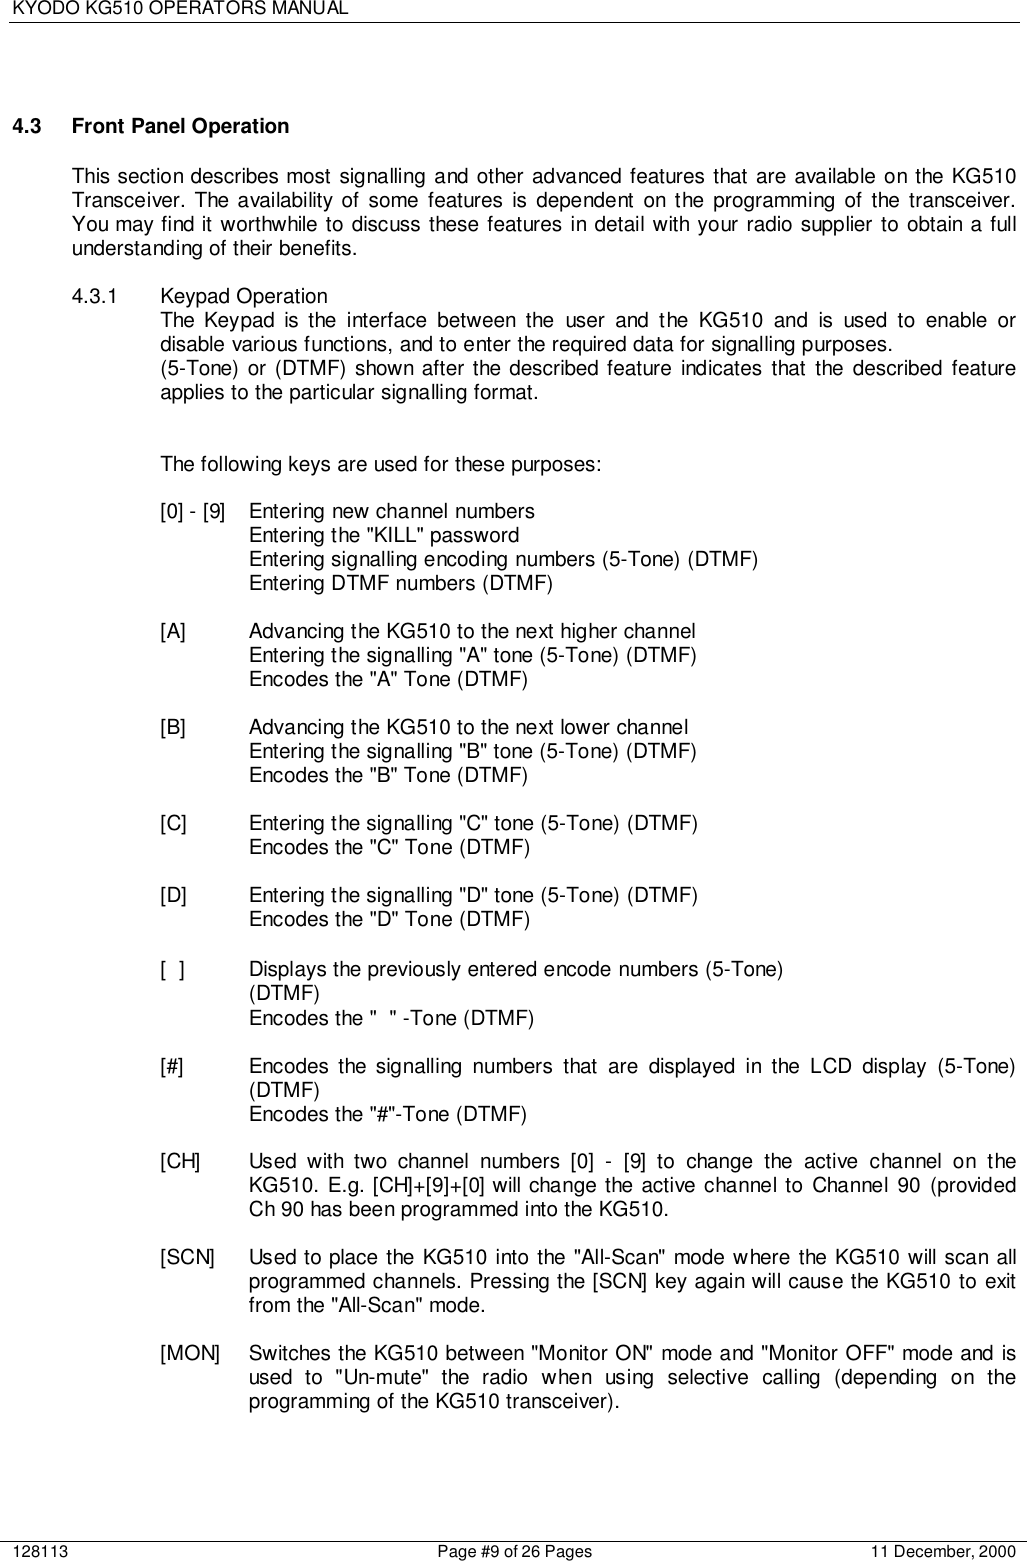 KYODO KG510 OPERATORS MANUAL128113 Page #9 of 26 Pages 11 December, 20004.3  Front Panel OperationThis section describes most signalling and other advanced features that are available on the KG510Transceiver. The availability of some features is dependent on the programming of the transceiver.You may find it worthwhile to discuss these features in detail with your radio supplier to obtain a fullunderstanding of their benefits.4.3.1 Keypad OperationThe Keypad is the interface between the user and the KG510 and is used to enable ordisable various functions, and to enter the required data for signalling purposes.(5-Tone) or (DTMF) shown after the described feature indicates that the described featureapplies to the particular signalling format.The following keys are used for these purposes:[0] - [9] Entering new channel numbersEntering the &quot;KILL&quot; passwordEntering signalling encoding numbers (5-Tone) (DTMF)Entering DTMF numbers (DTMF)[A] Advancing the KG510 to the next higher channelEntering the signalling &quot;A&quot; tone (5-Tone) (DTMF)Encodes the &quot;A&quot; Tone (DTMF)[B] Advancing the KG510 to the next lower channelEntering the signalling &quot;B&quot; tone (5-Tone) (DTMF)Encodes the &quot;B&quot; Tone (DTMF)[C] Entering the signalling &quot;C&quot; tone (5-Tone) (DTMF)Encodes the &quot;C&quot; Tone (DTMF)[D] Entering the signalling &quot;D&quot; tone (5-Tone) (DTMF)Encodes the &quot;D&quot; Tone (DTMF)[ ] Displays the previously entered encode numbers (5-Tone)(DTMF)Encodes the &quot; &quot; -Tone (DTMF)[#] Encodes the signalling numbers that are displayed in the LCD display (5-Tone)(DTMF)Encodes the &quot;#&quot;-Tone (DTMF)[CH] Used with two channel numbers [0] - [9] to change the active channel on theKG510. E.g. [CH]+[9]+[0] will change the active channel to Channel 90 (providedCh 90 has been programmed into the KG510.[SCN] Used to place the KG510 into the &quot;All-Scan&quot; mode where the KG510 will scan allprogrammed channels. Pressing the [SCN] key again will cause the KG510 to exitfrom the &quot;All-Scan&quot; mode.[MON] Switches the KG510 between &quot;Monitor ON&quot; mode and &quot;Monitor OFF&quot; mode and isused to &quot;Un-mute&quot; the radio when using selective calling (depending on theprogramming of the KG510 transceiver).